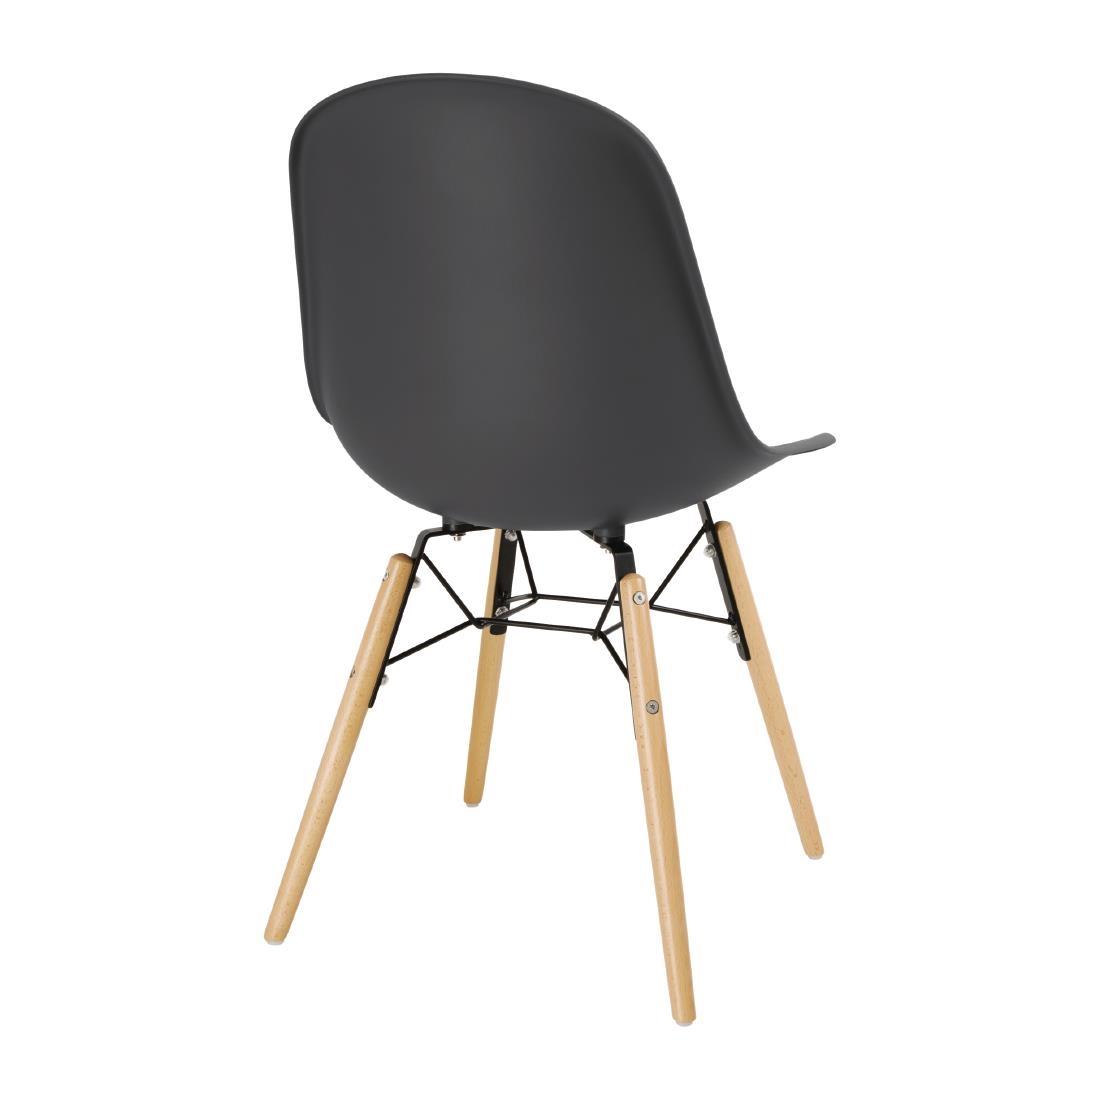 Bolero Arlo PP Moulded Side Chair Charcoal with Spindle Legs (Pack of 2) - DM841  - 3